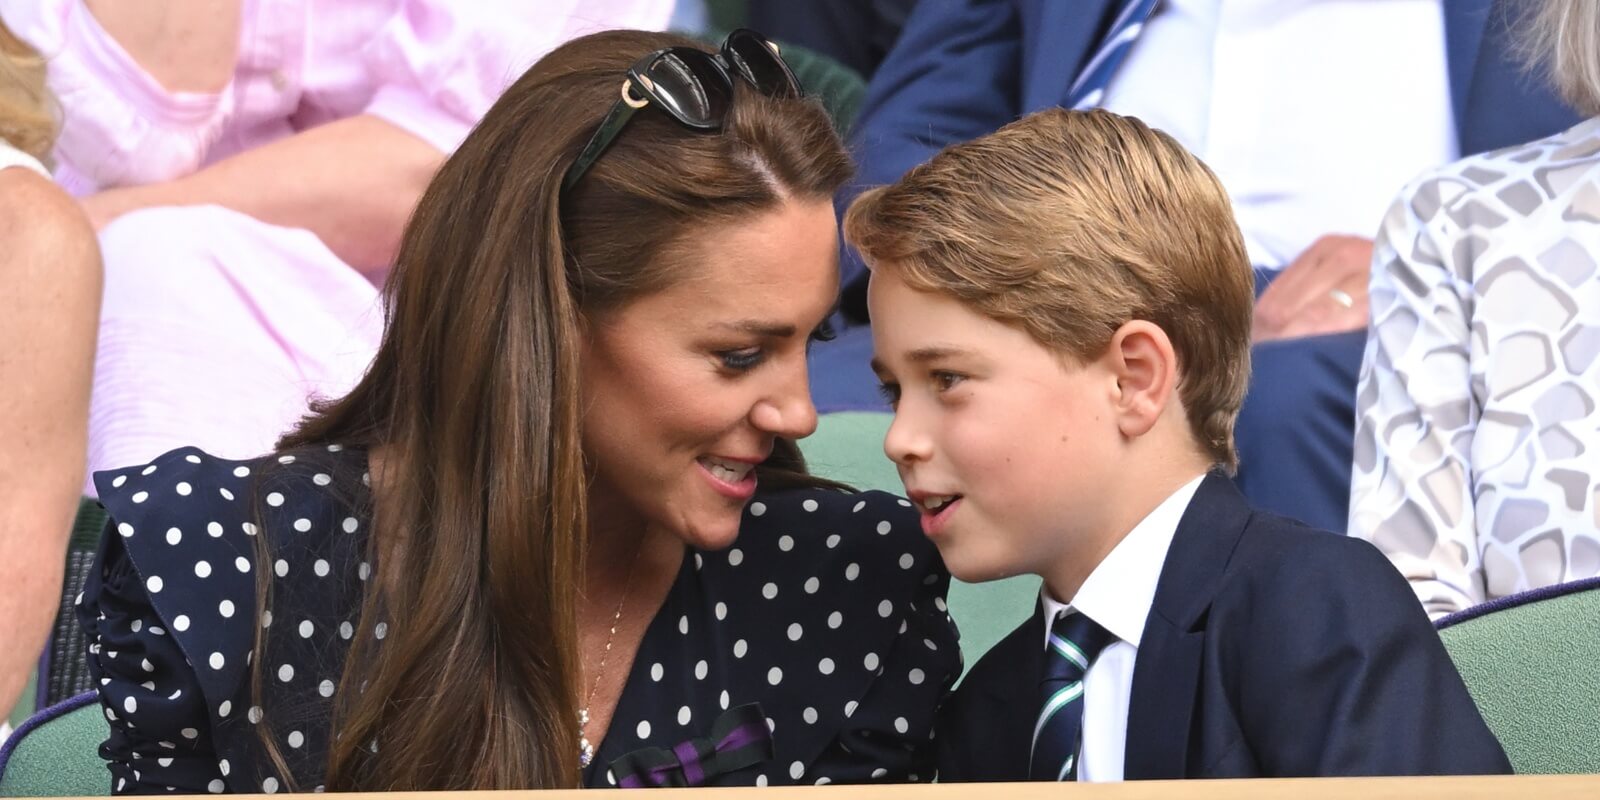 Kate Middleton and Prince George photographed at the Men's Singles Final at All England Lawn Tennis and Croquet Club on July 10, 2022 in London, England.